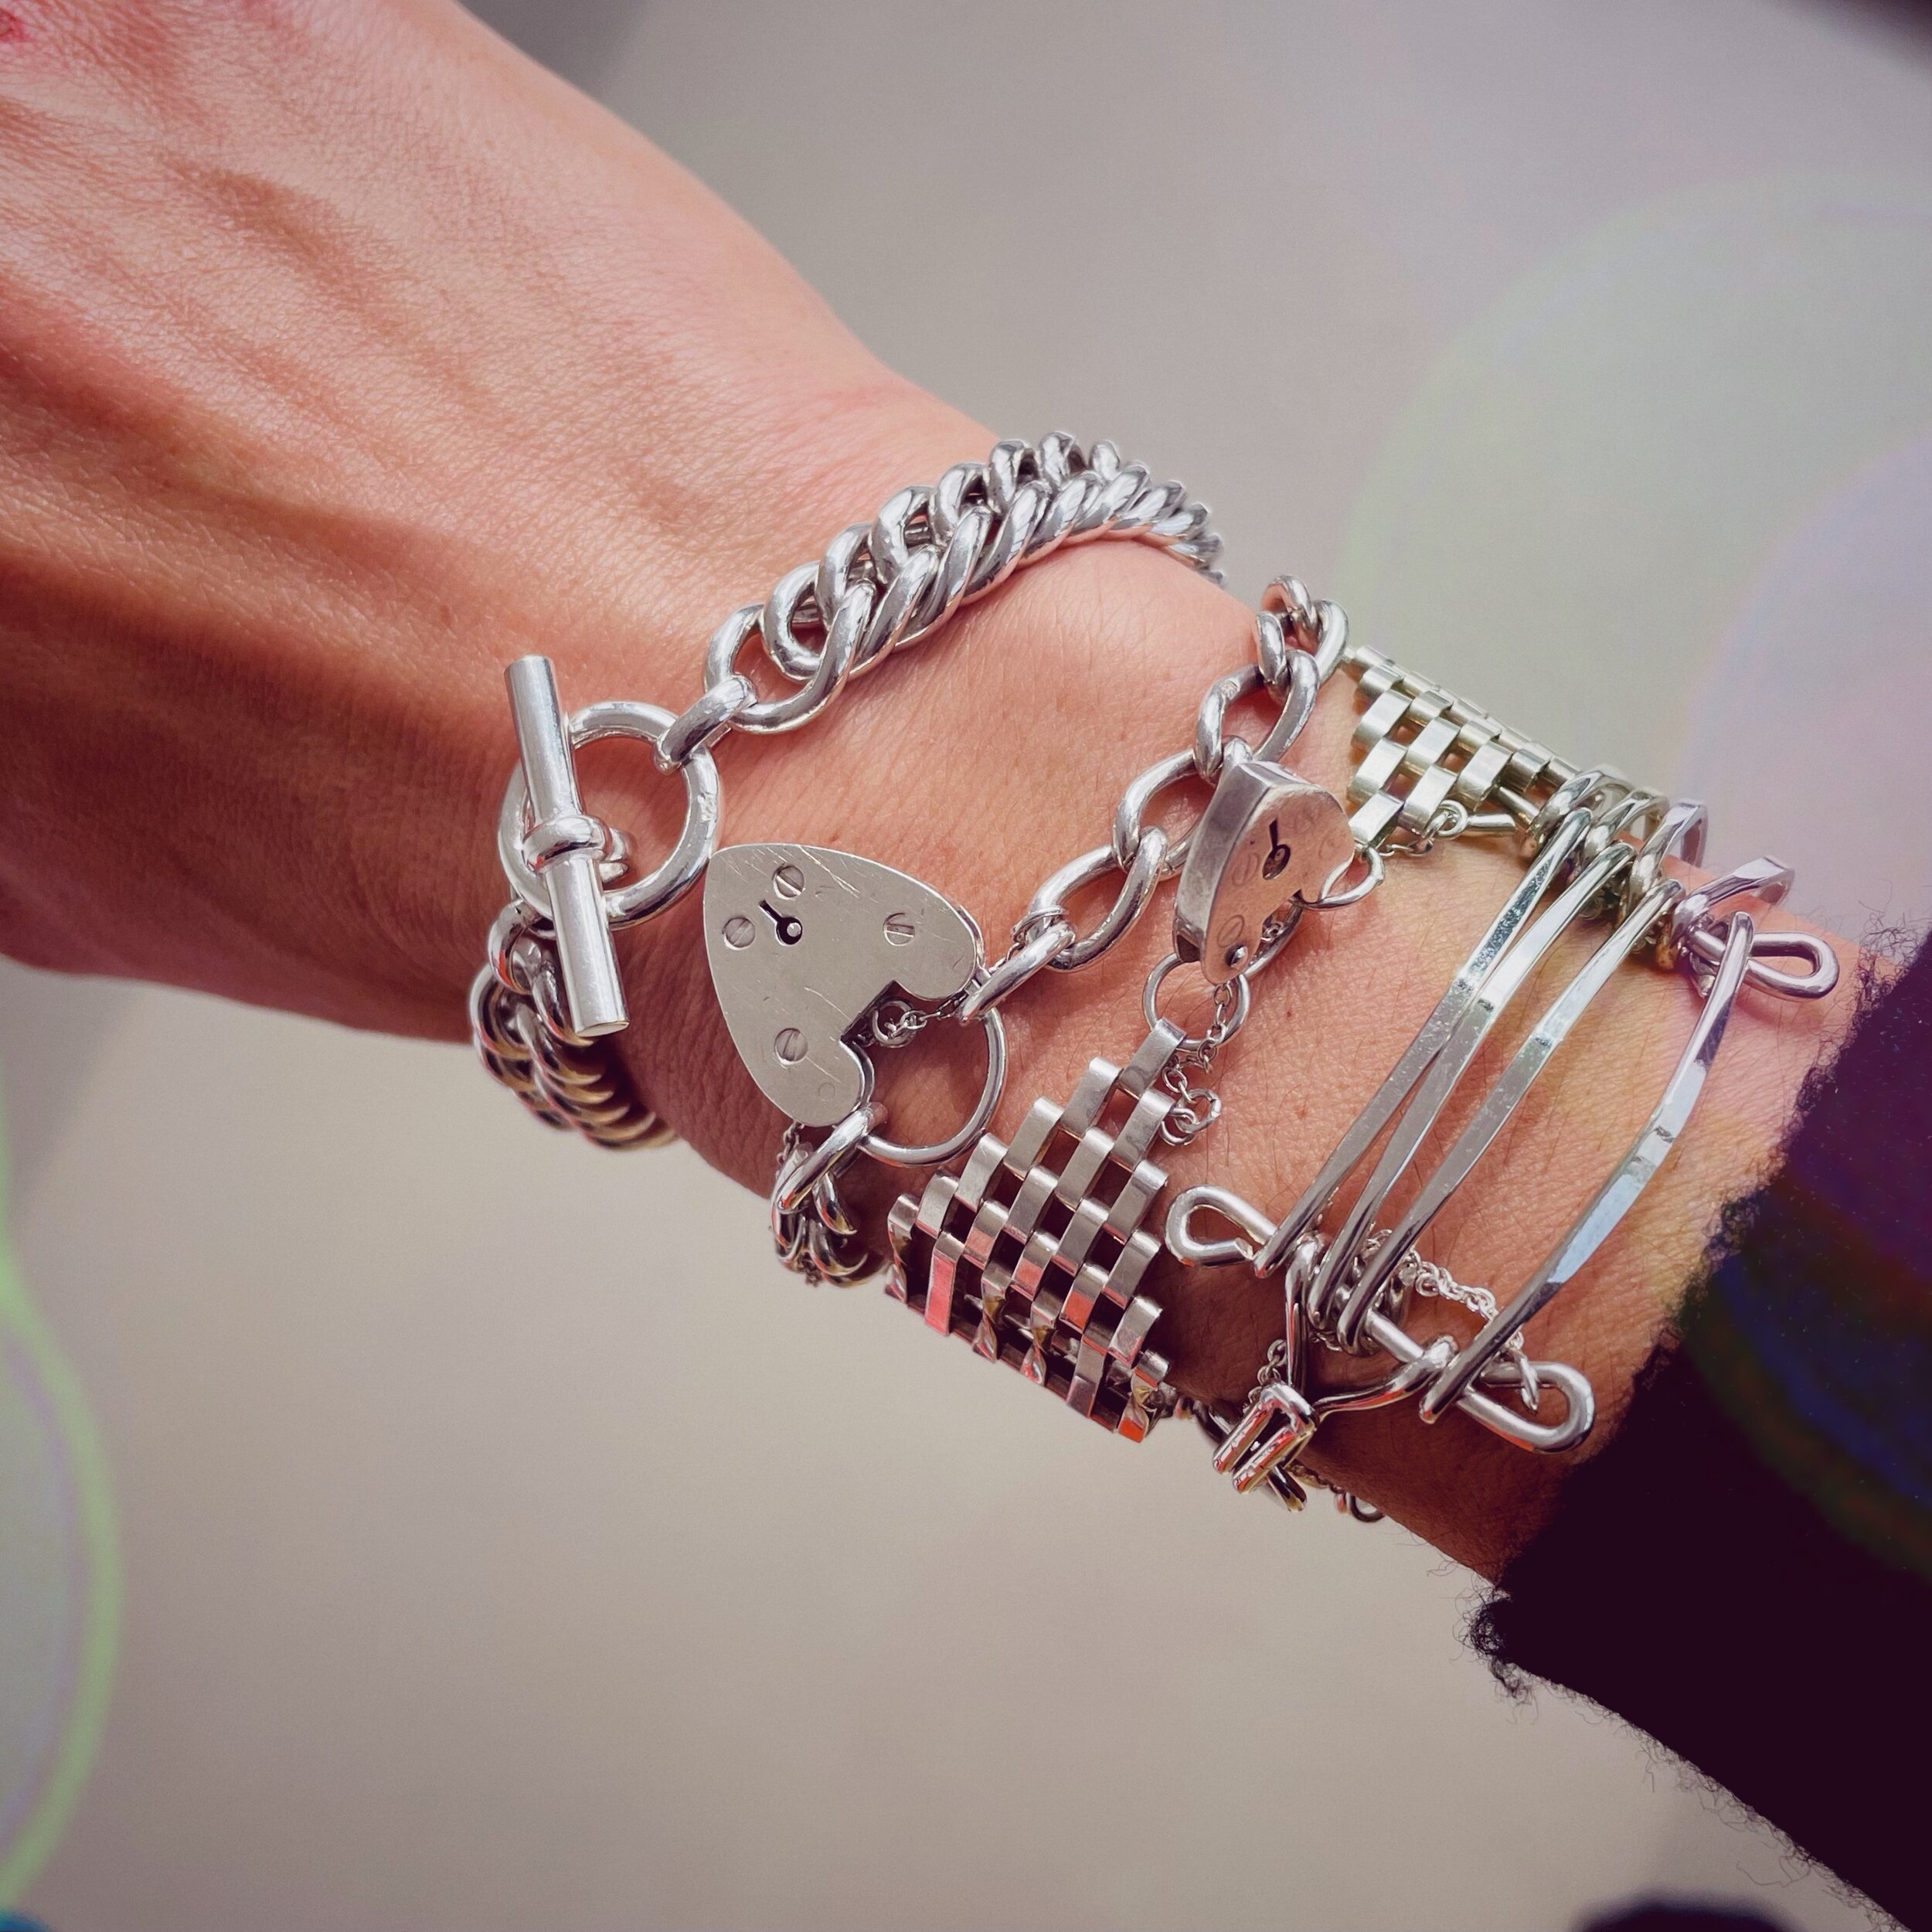 Personal silver bracelet stack with Tilly Sveaas curb chain bracelet